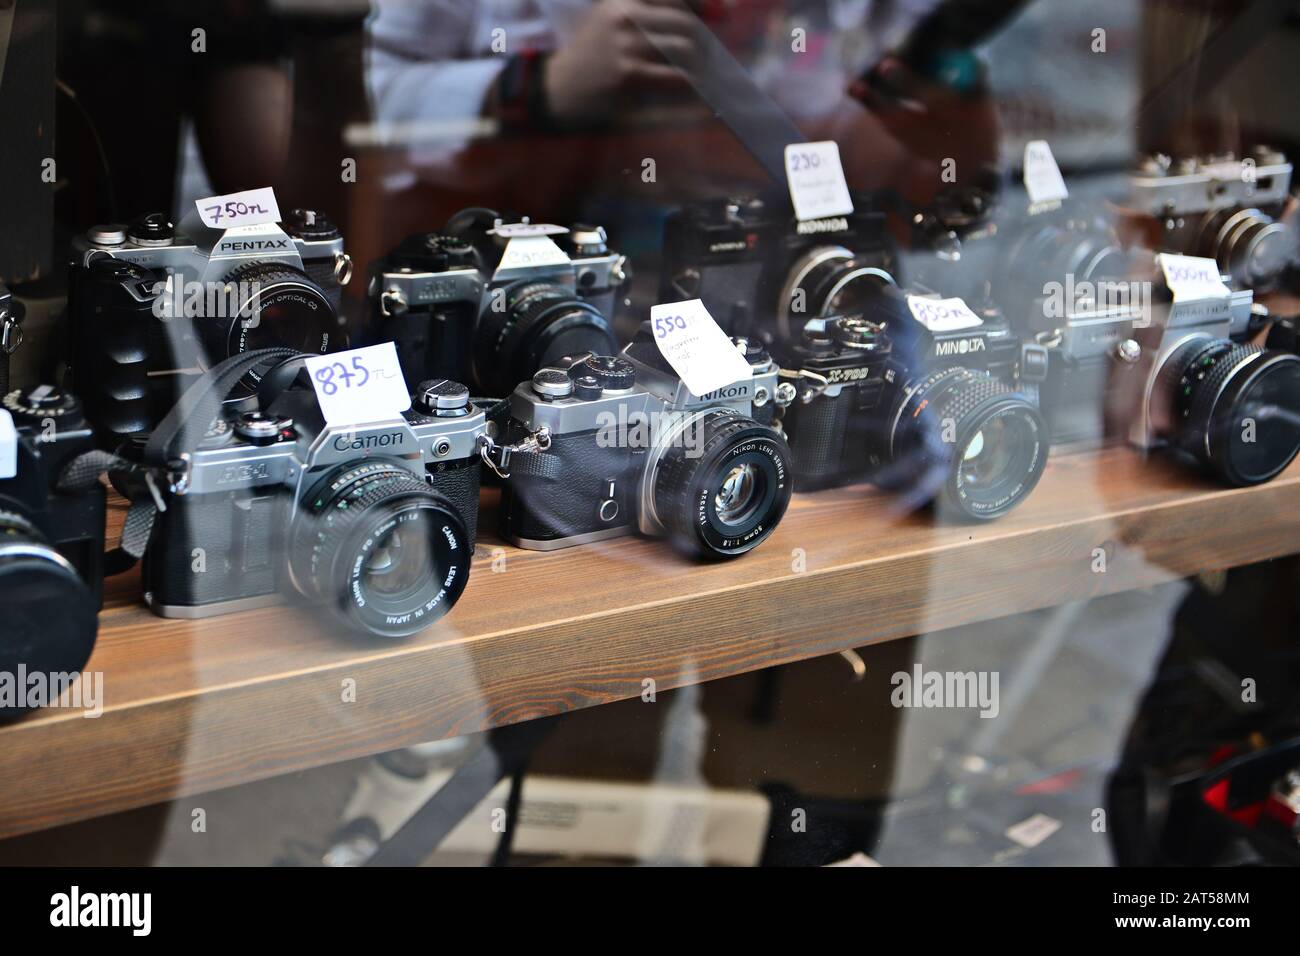 ISTANBUL, TURKEY - Sep 16, 2019: Old film cameras on display in a shop window. Stock Photo